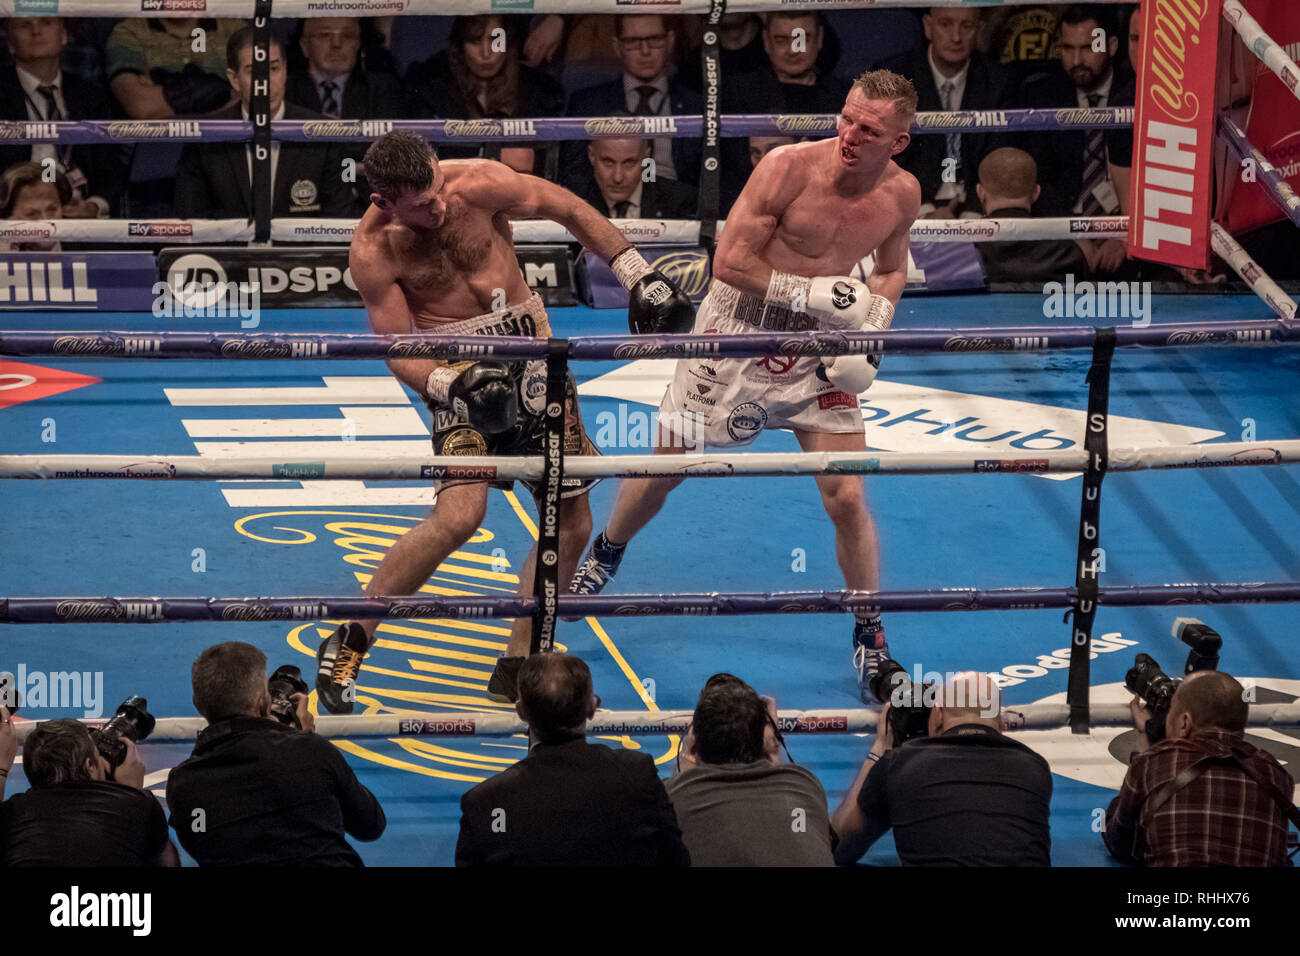 London, UK. 2nd Feb, 2019. Sergio Garcia vs. Ted Cheeseman. European super-welterweight champion title at The O2 arena. Credit: Guy Corbishley/Alamy Live News Stock Photo